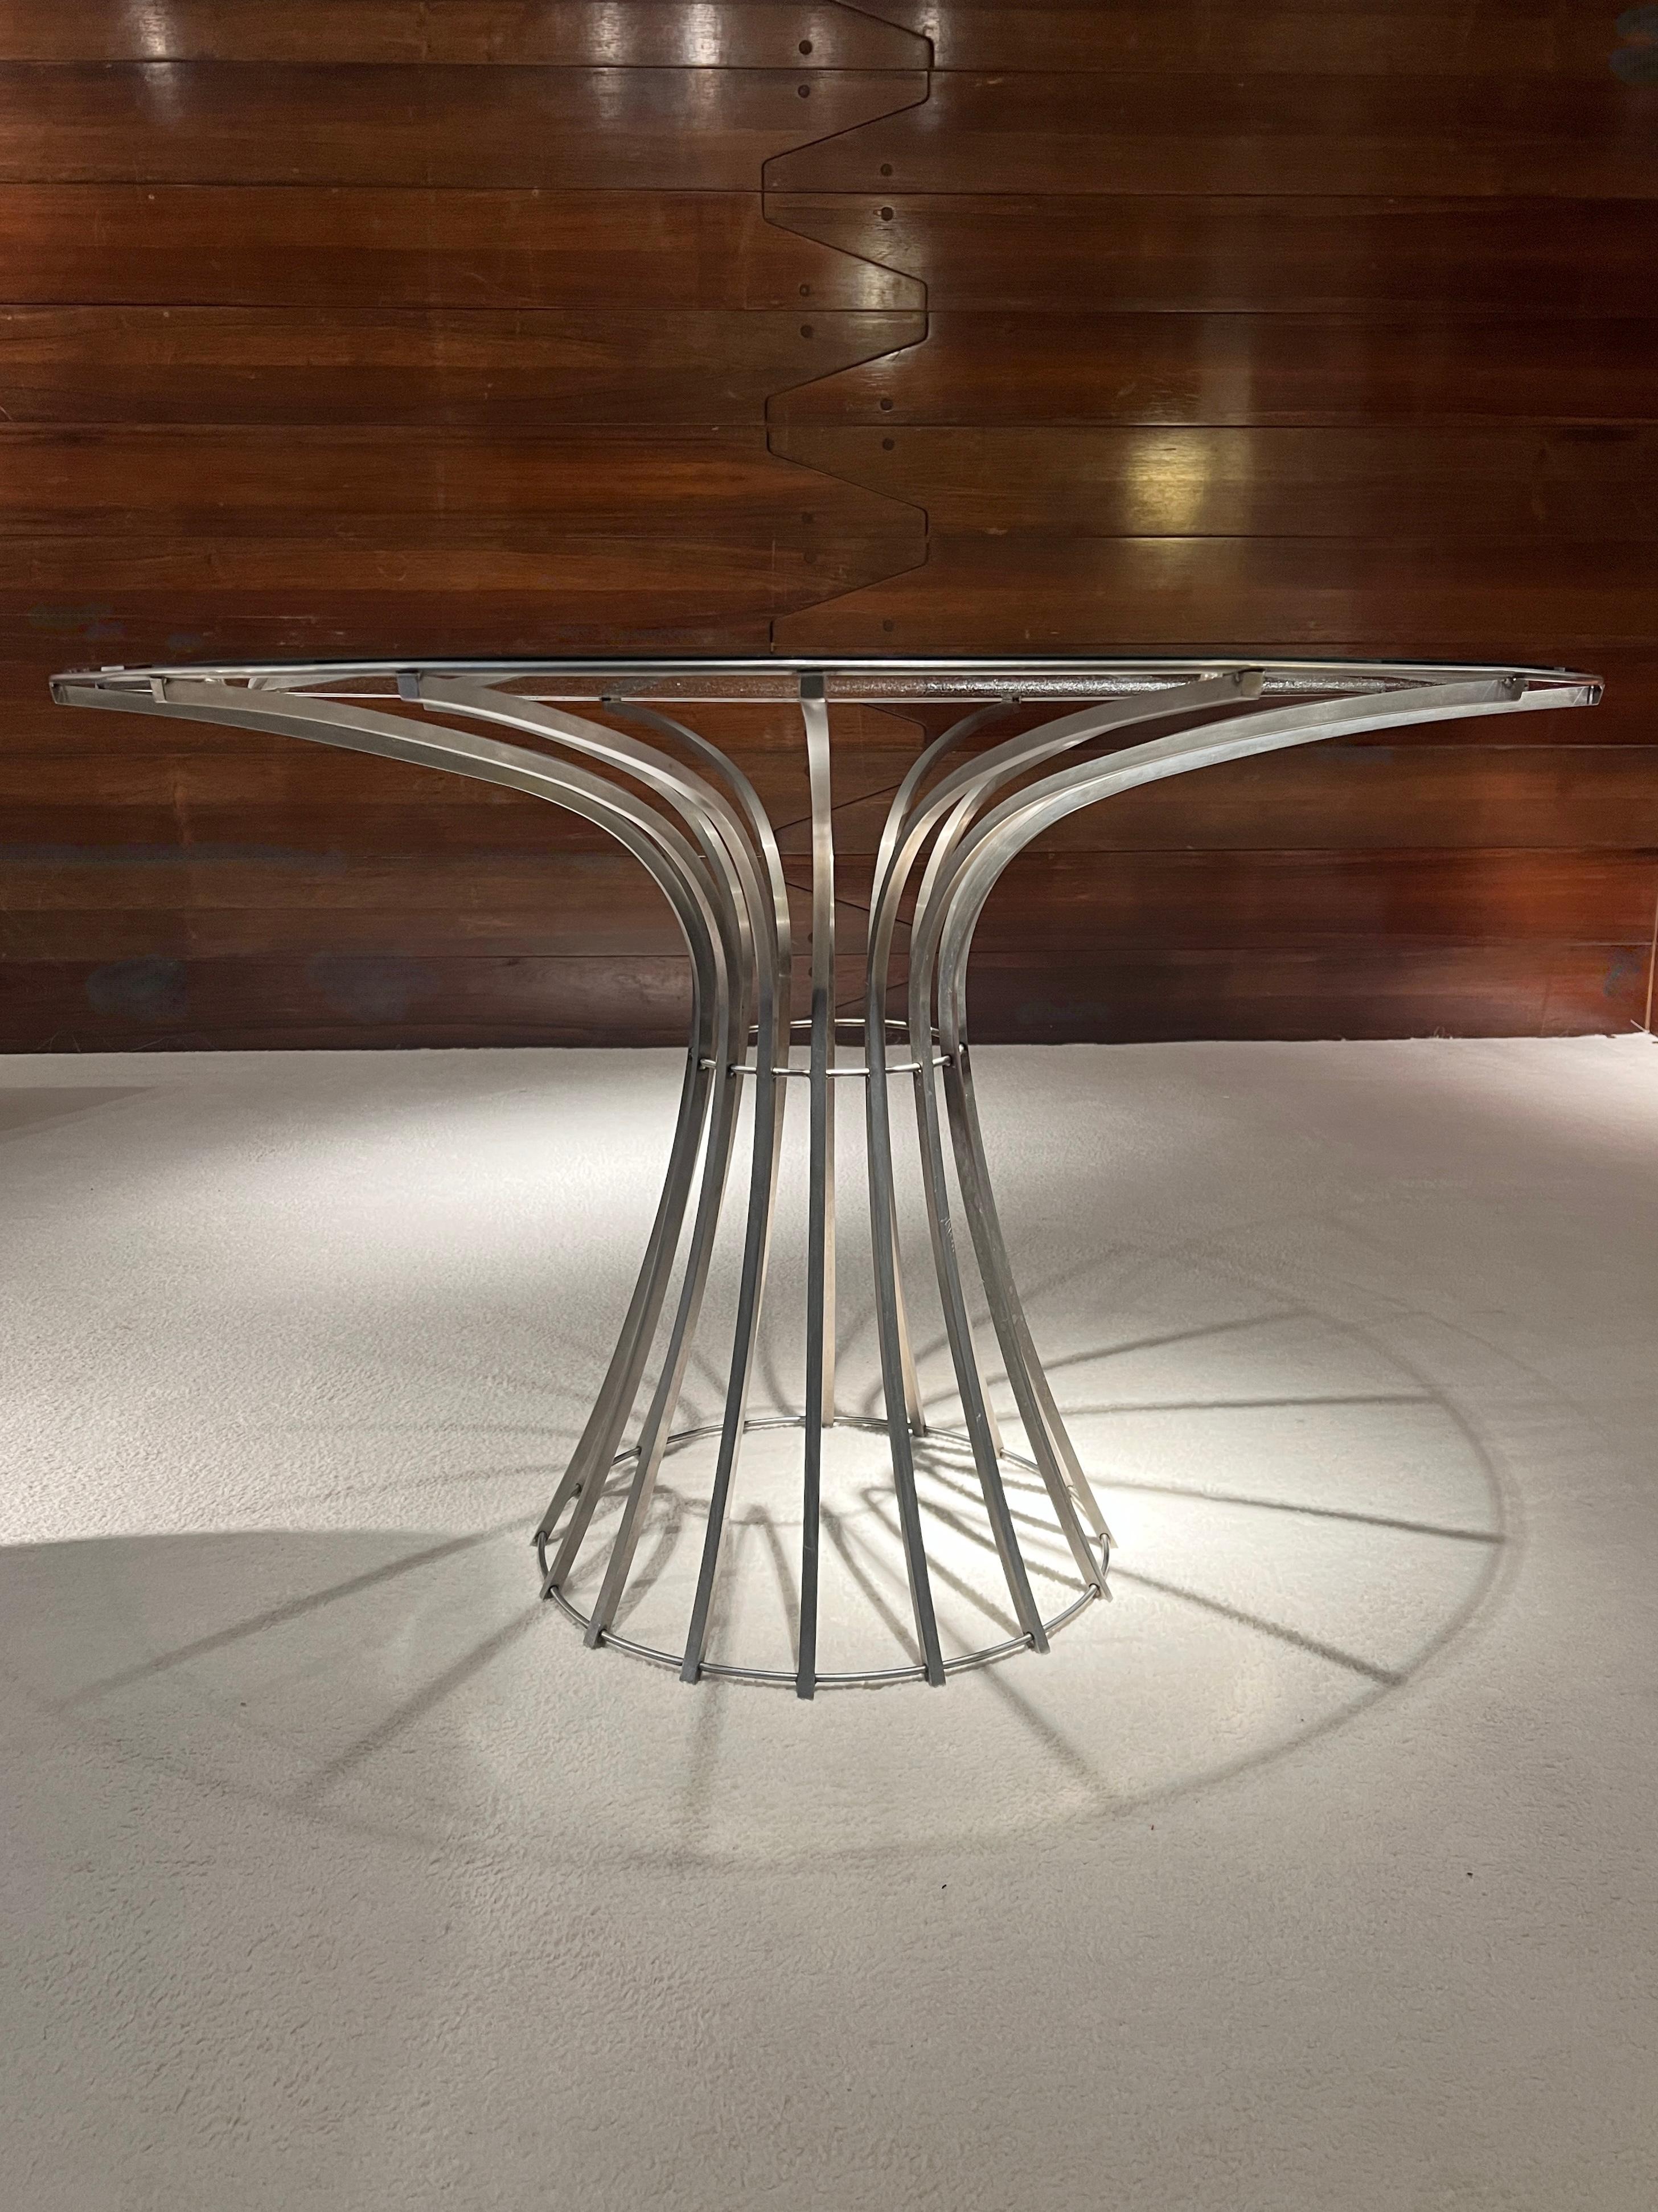 Outstanding table designed by French designer Xavier Fréal. 
This airy design is based on an aesthetic construction with an architectural spirit. The slender, curved steel legs support the glass top with lightness and elegance. This table, which can